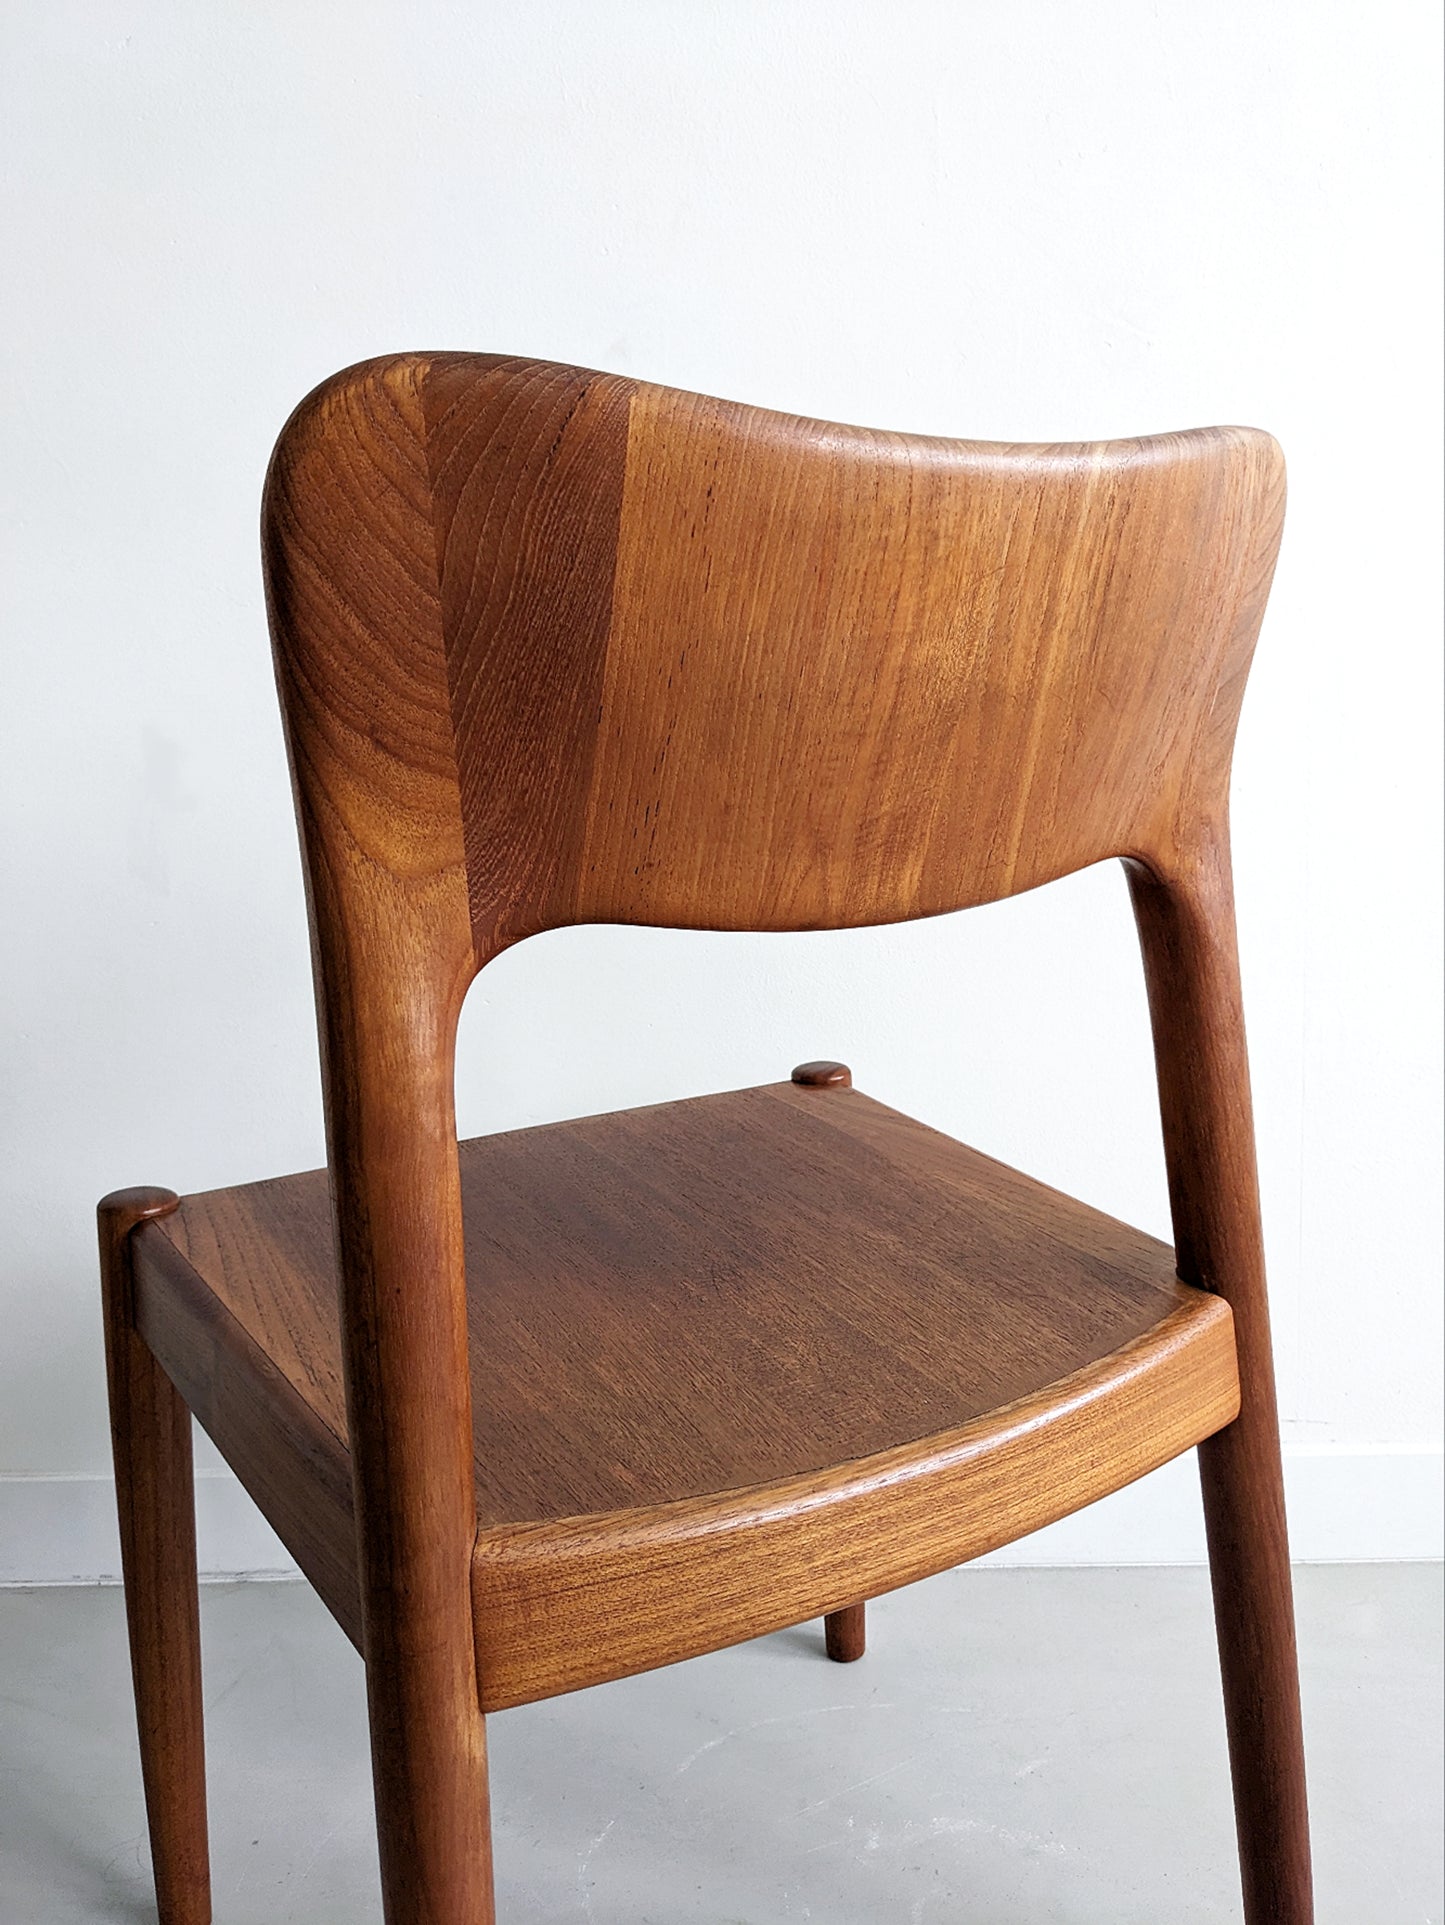 'Ole' Dining Chair by Niels Koefoed for Hornslet 1960's